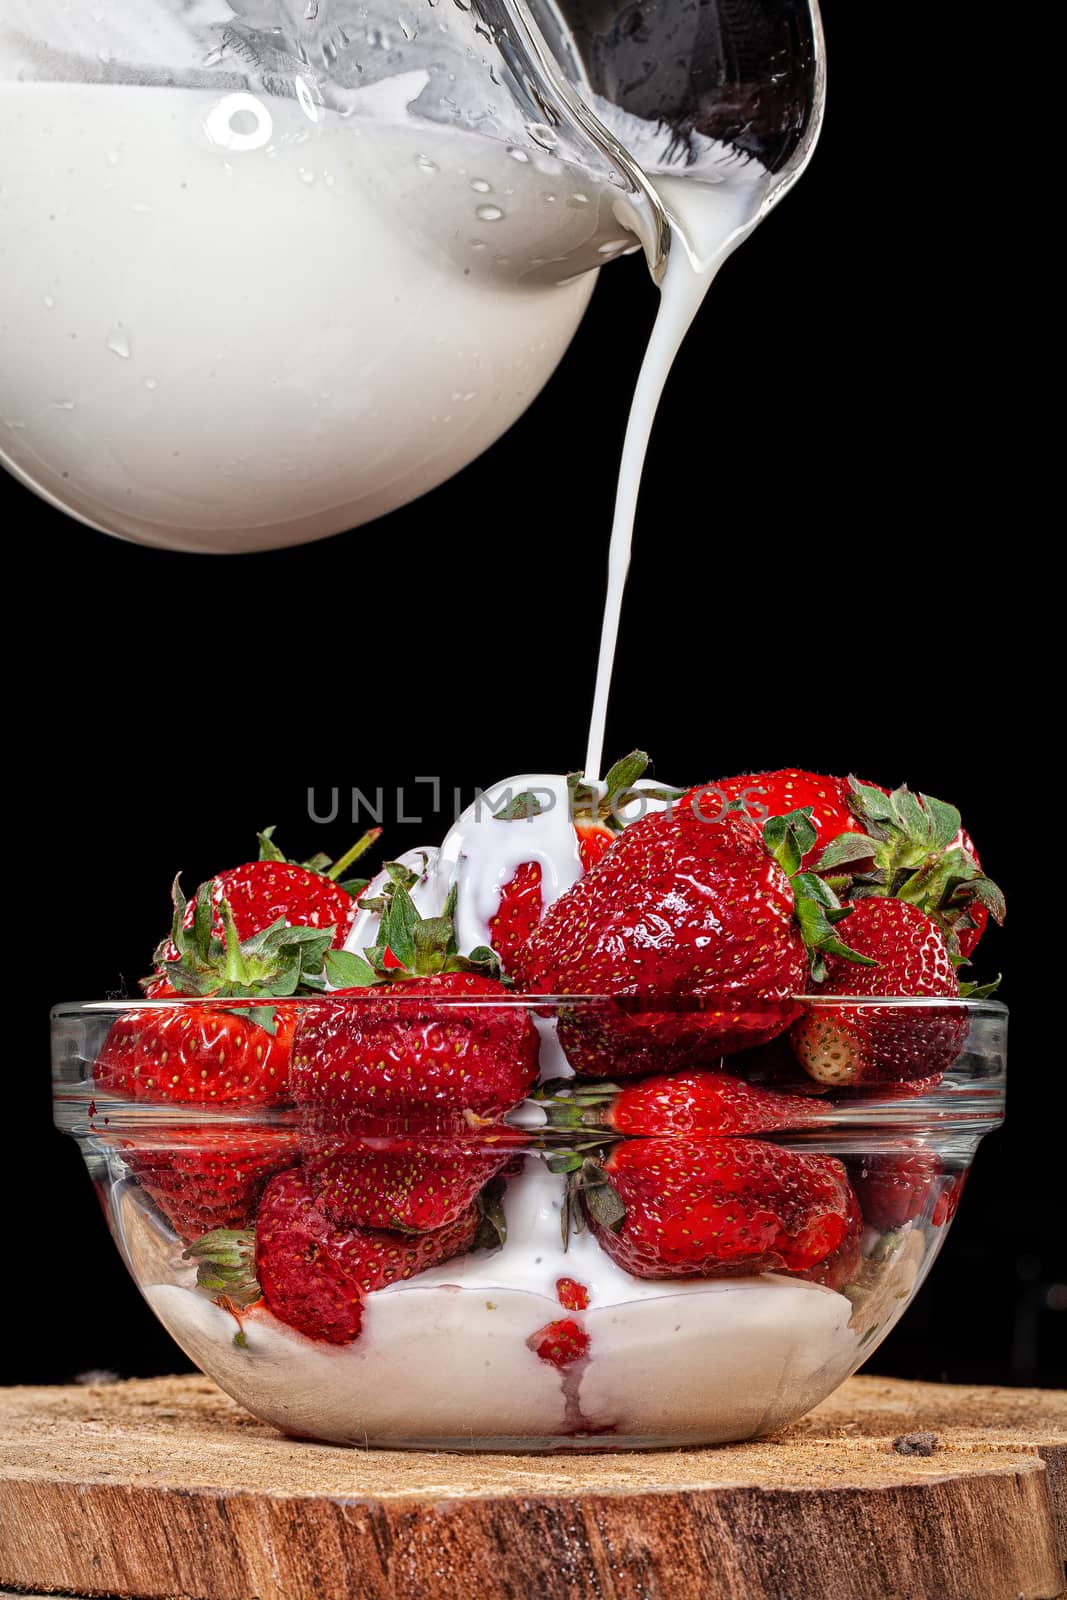 Strawberry With Cream by Fotoskat